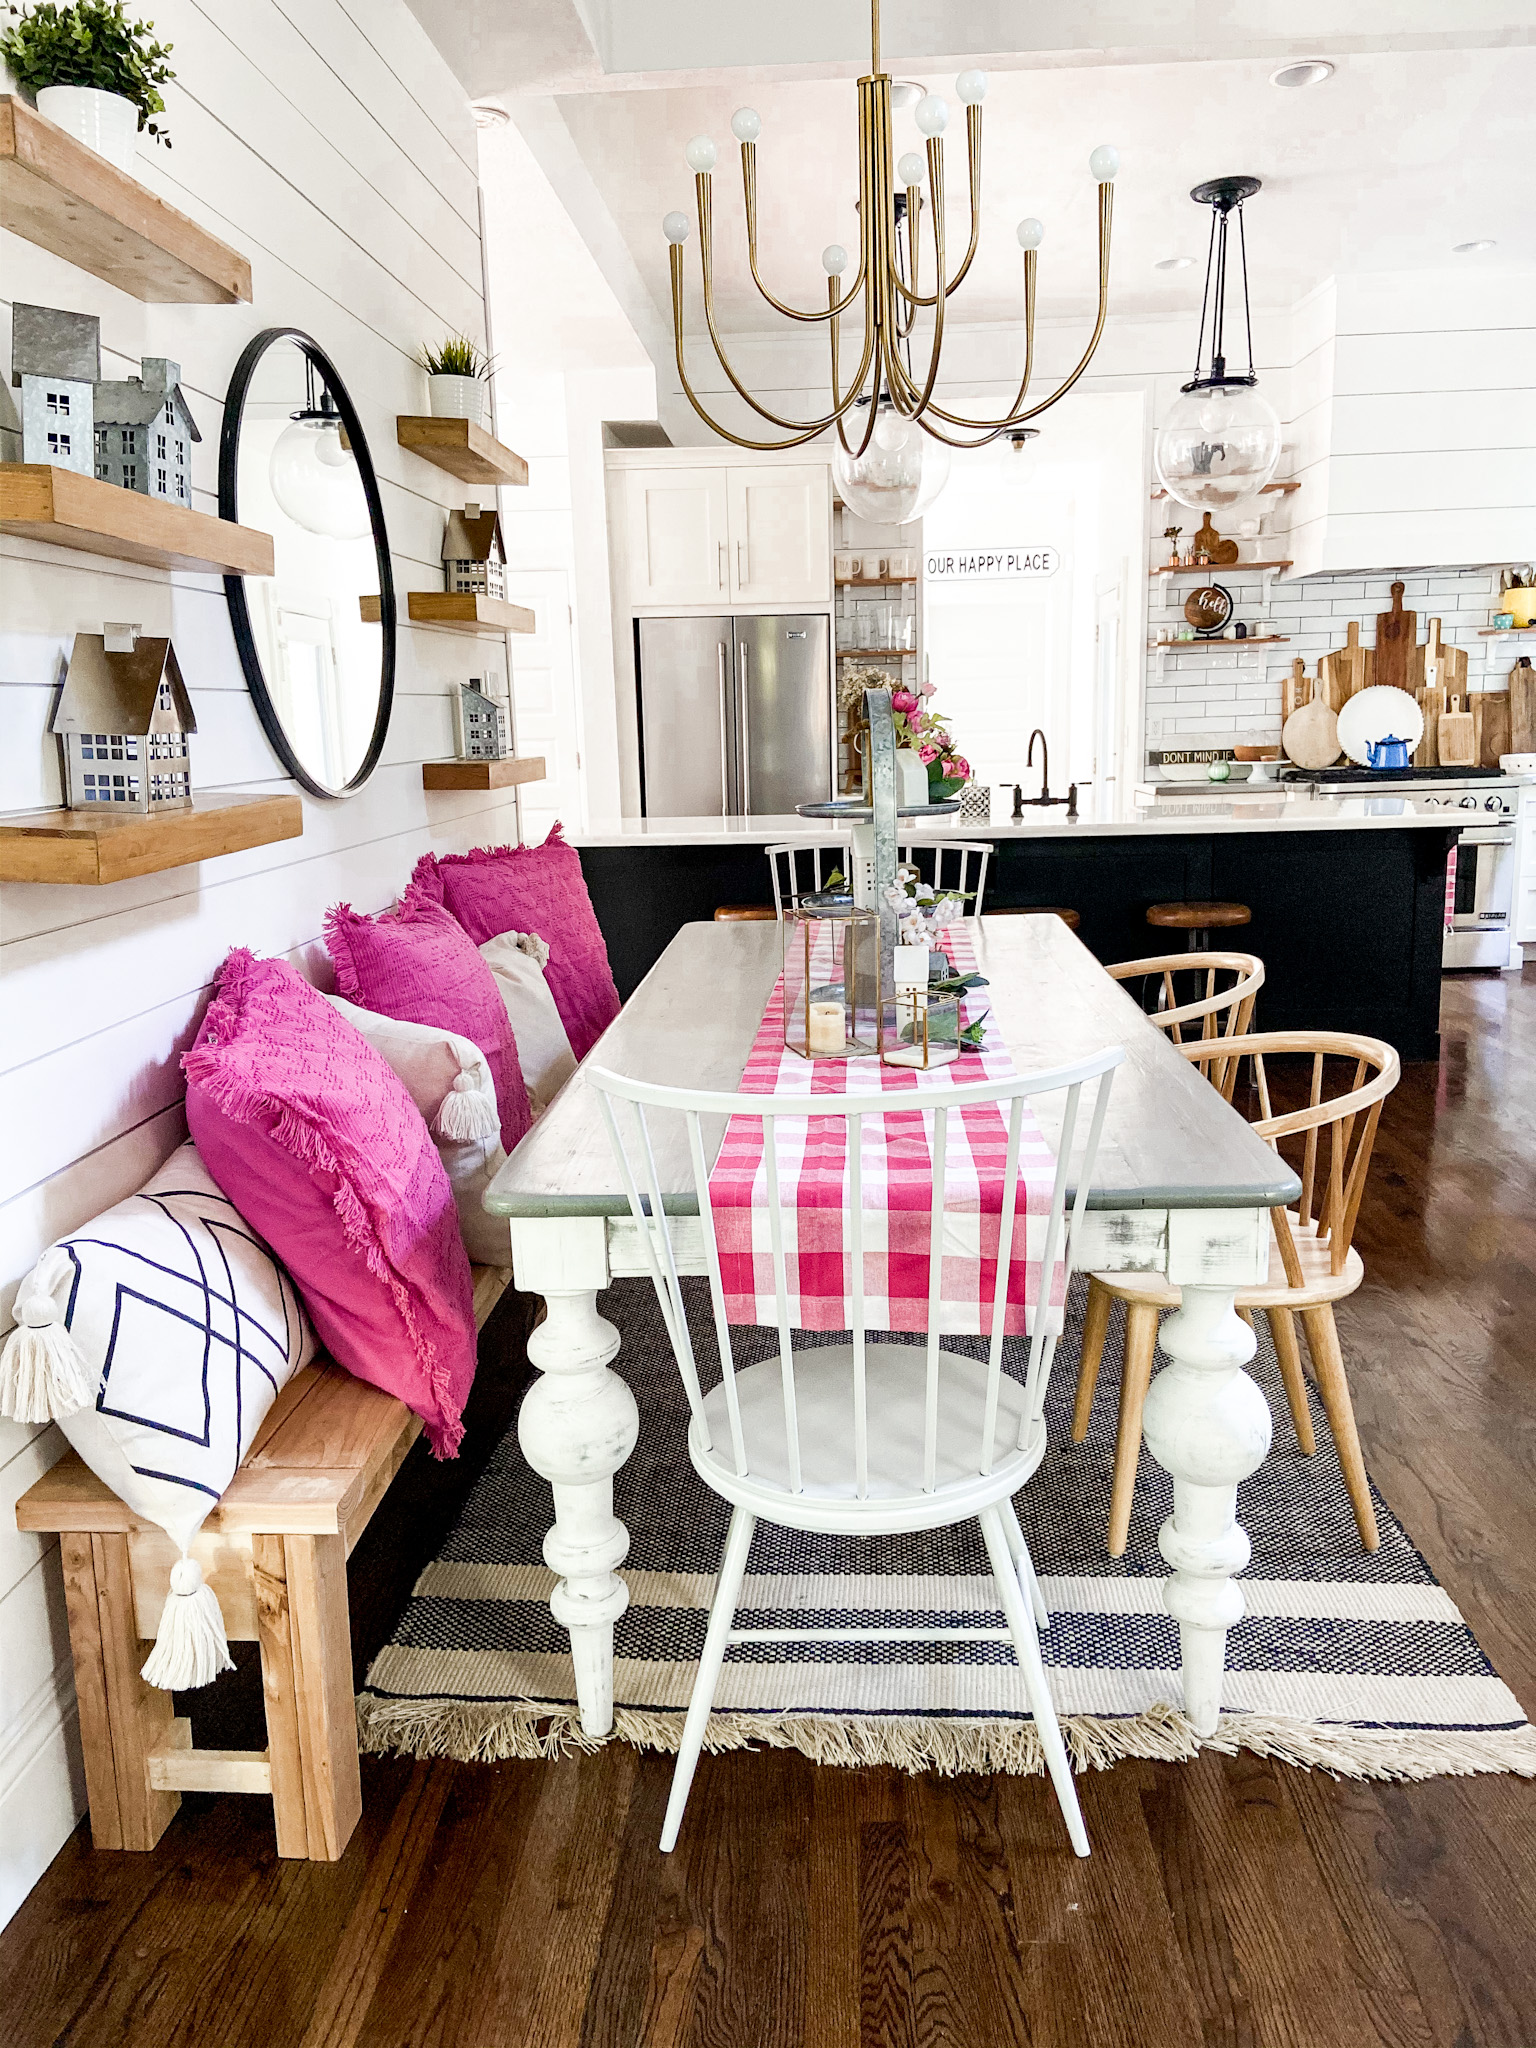 Ways to Bring Color to Your Cottage or Farmhouse Home. Add some bright color this summer to your home with these easy ideas!